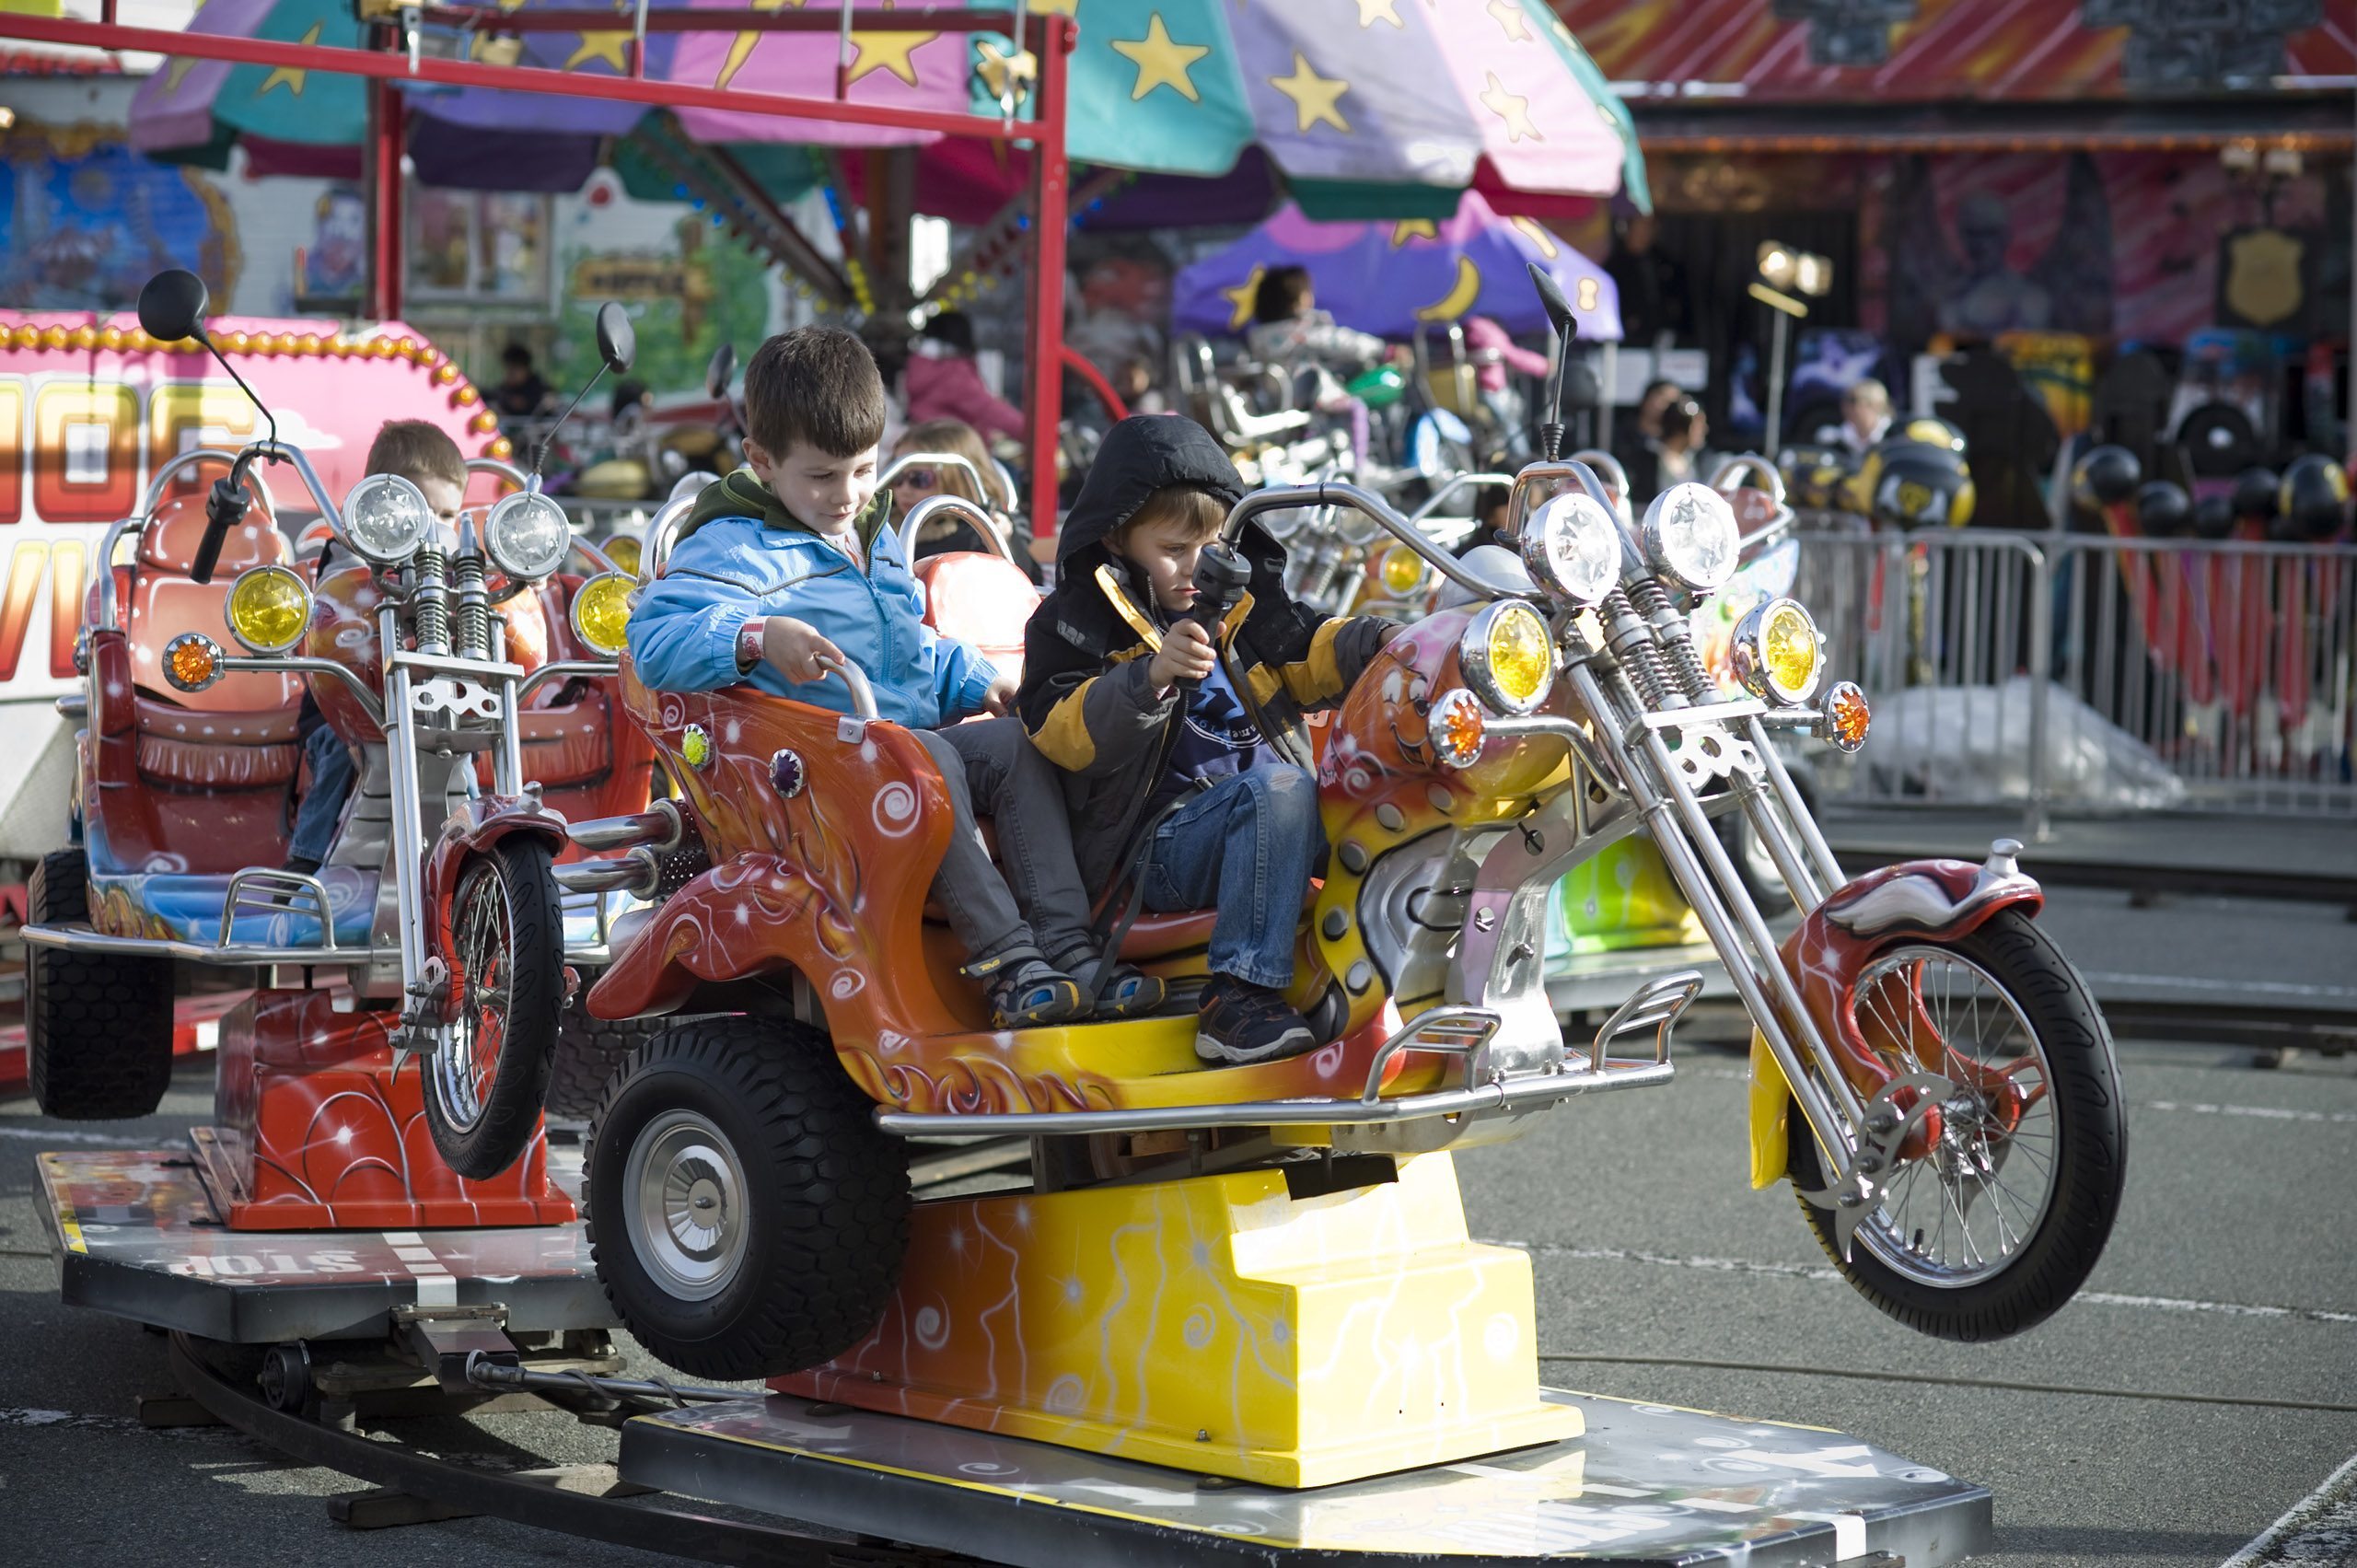 Two young boys riding a kiddie ride that is a motorcycle on a track at a carnival midway